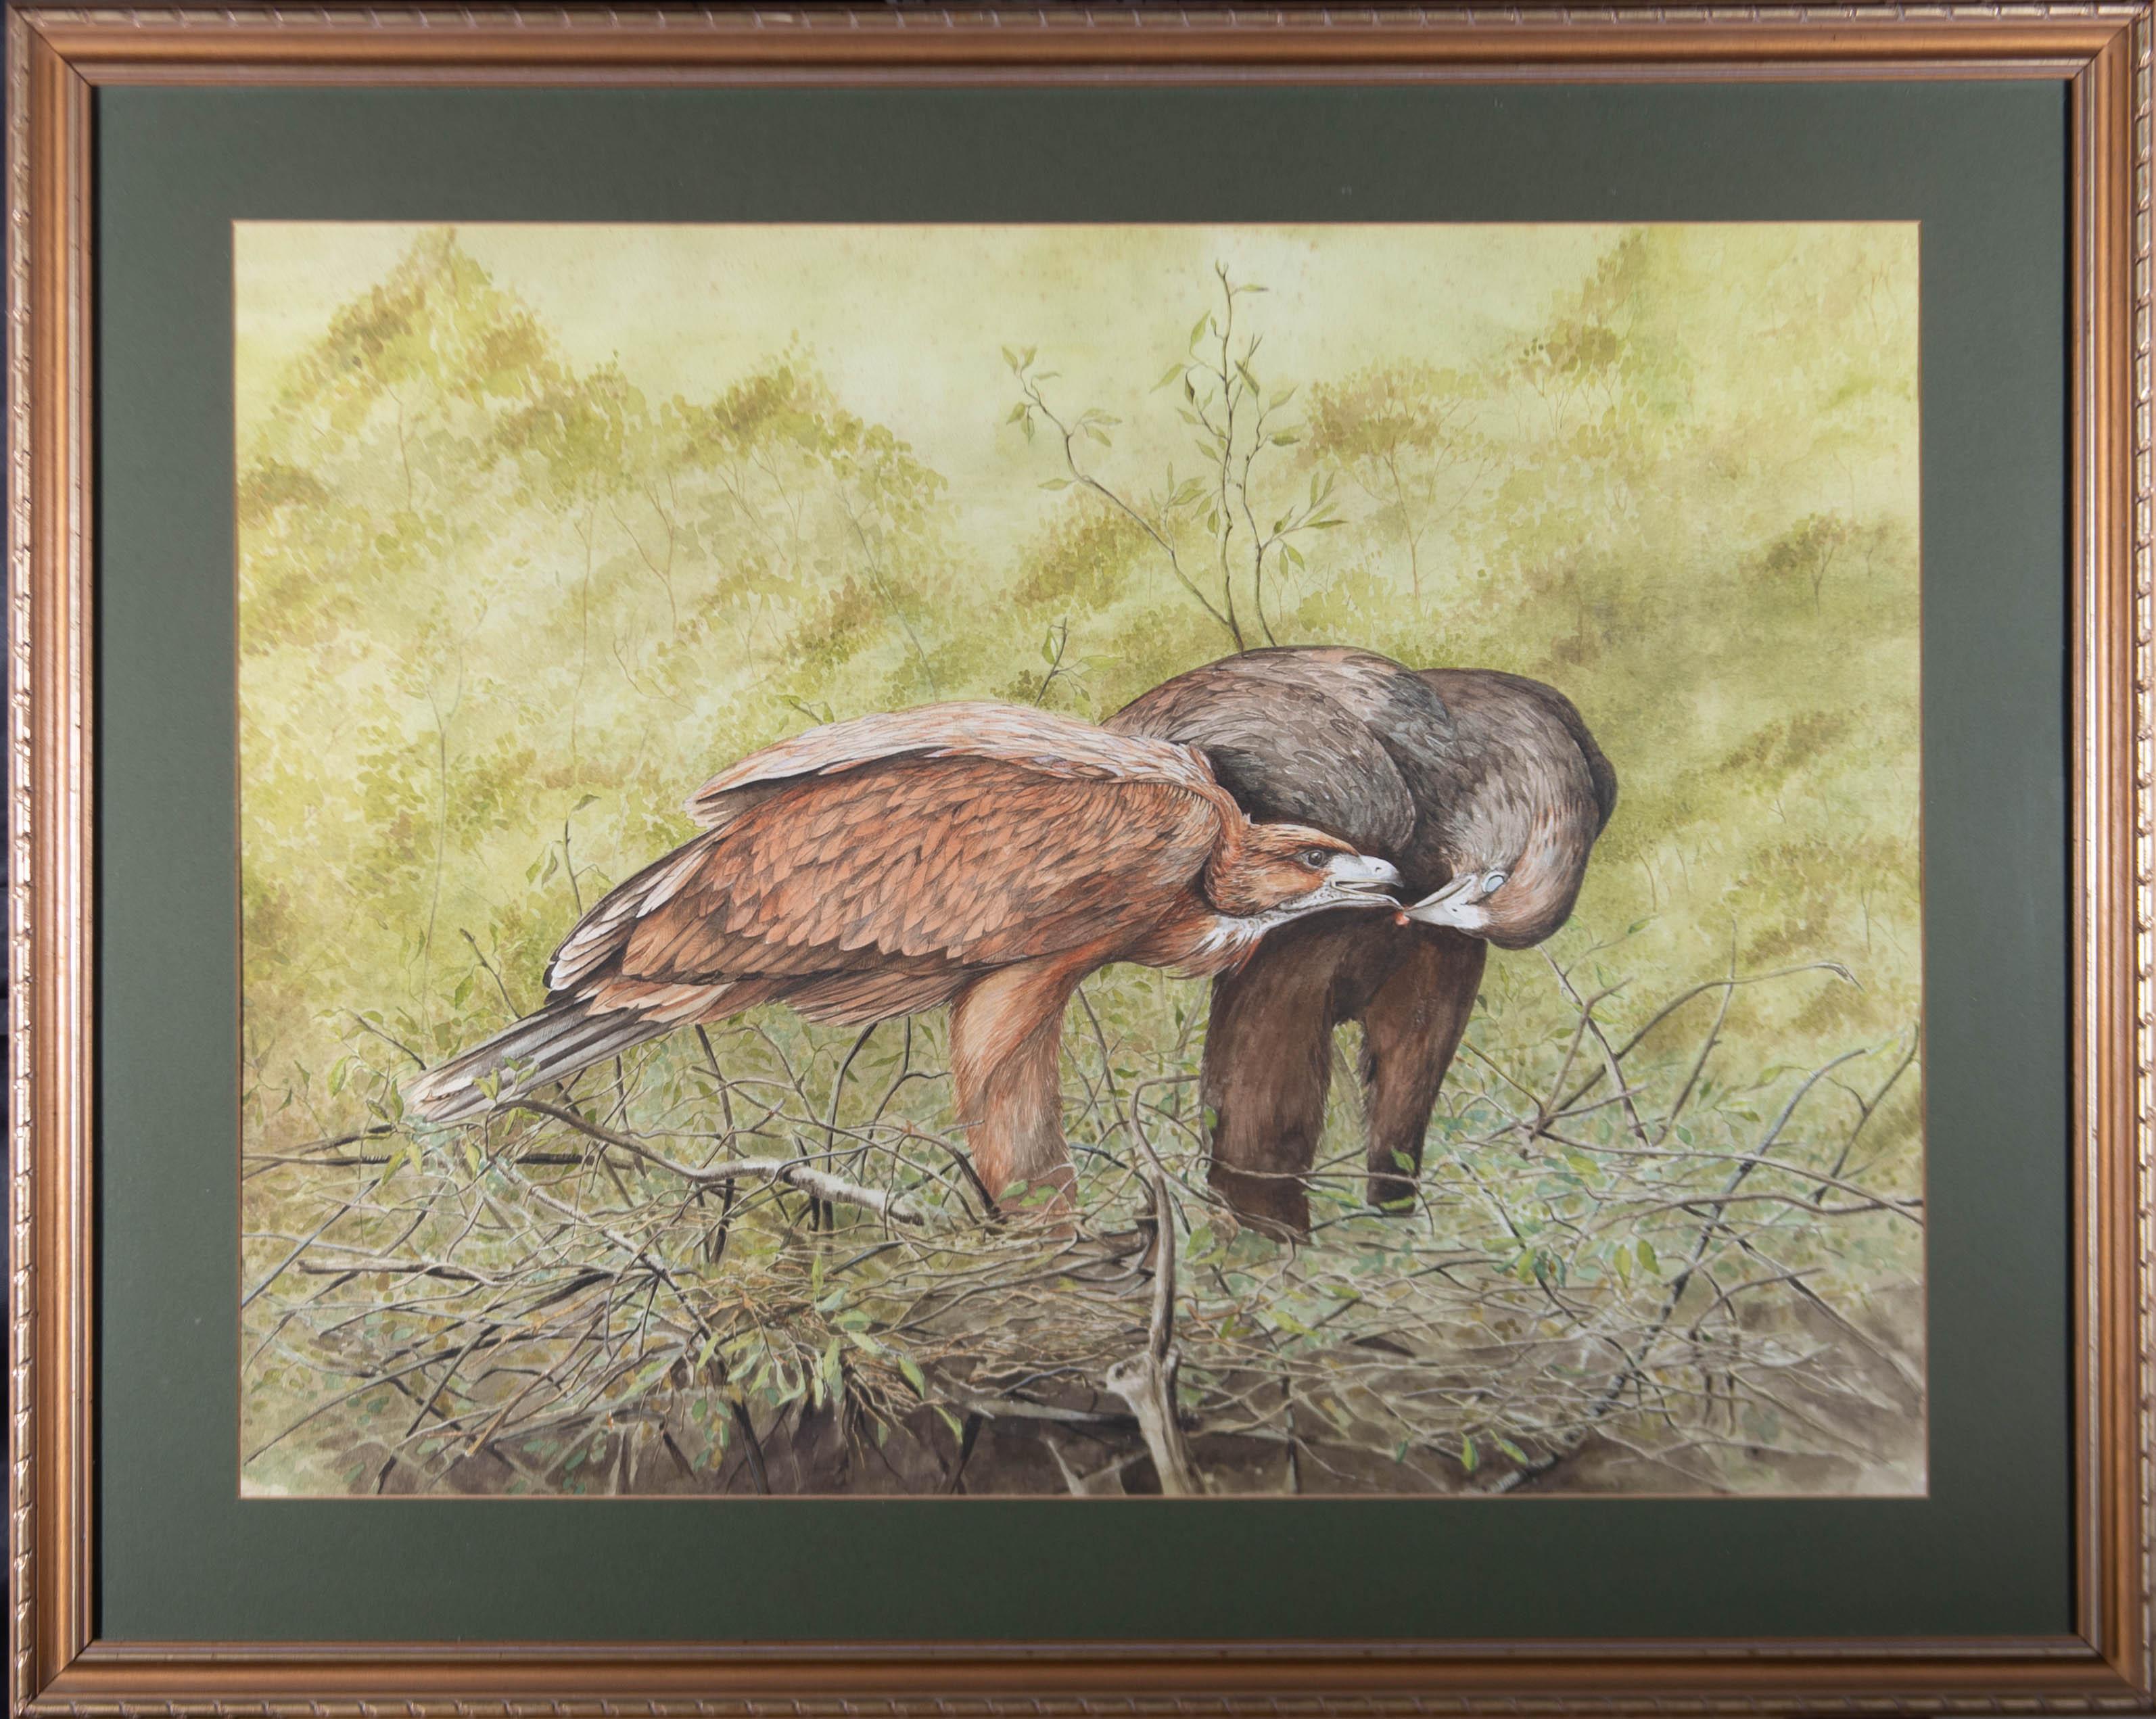 A fine watercolour study of a pair of large eagles in their nest, high in the treetops, sharing a morsel of meat from a recent prey. The painting is presented in a contemporary wood and gilt effect frame with glazing and a green card mount. There is